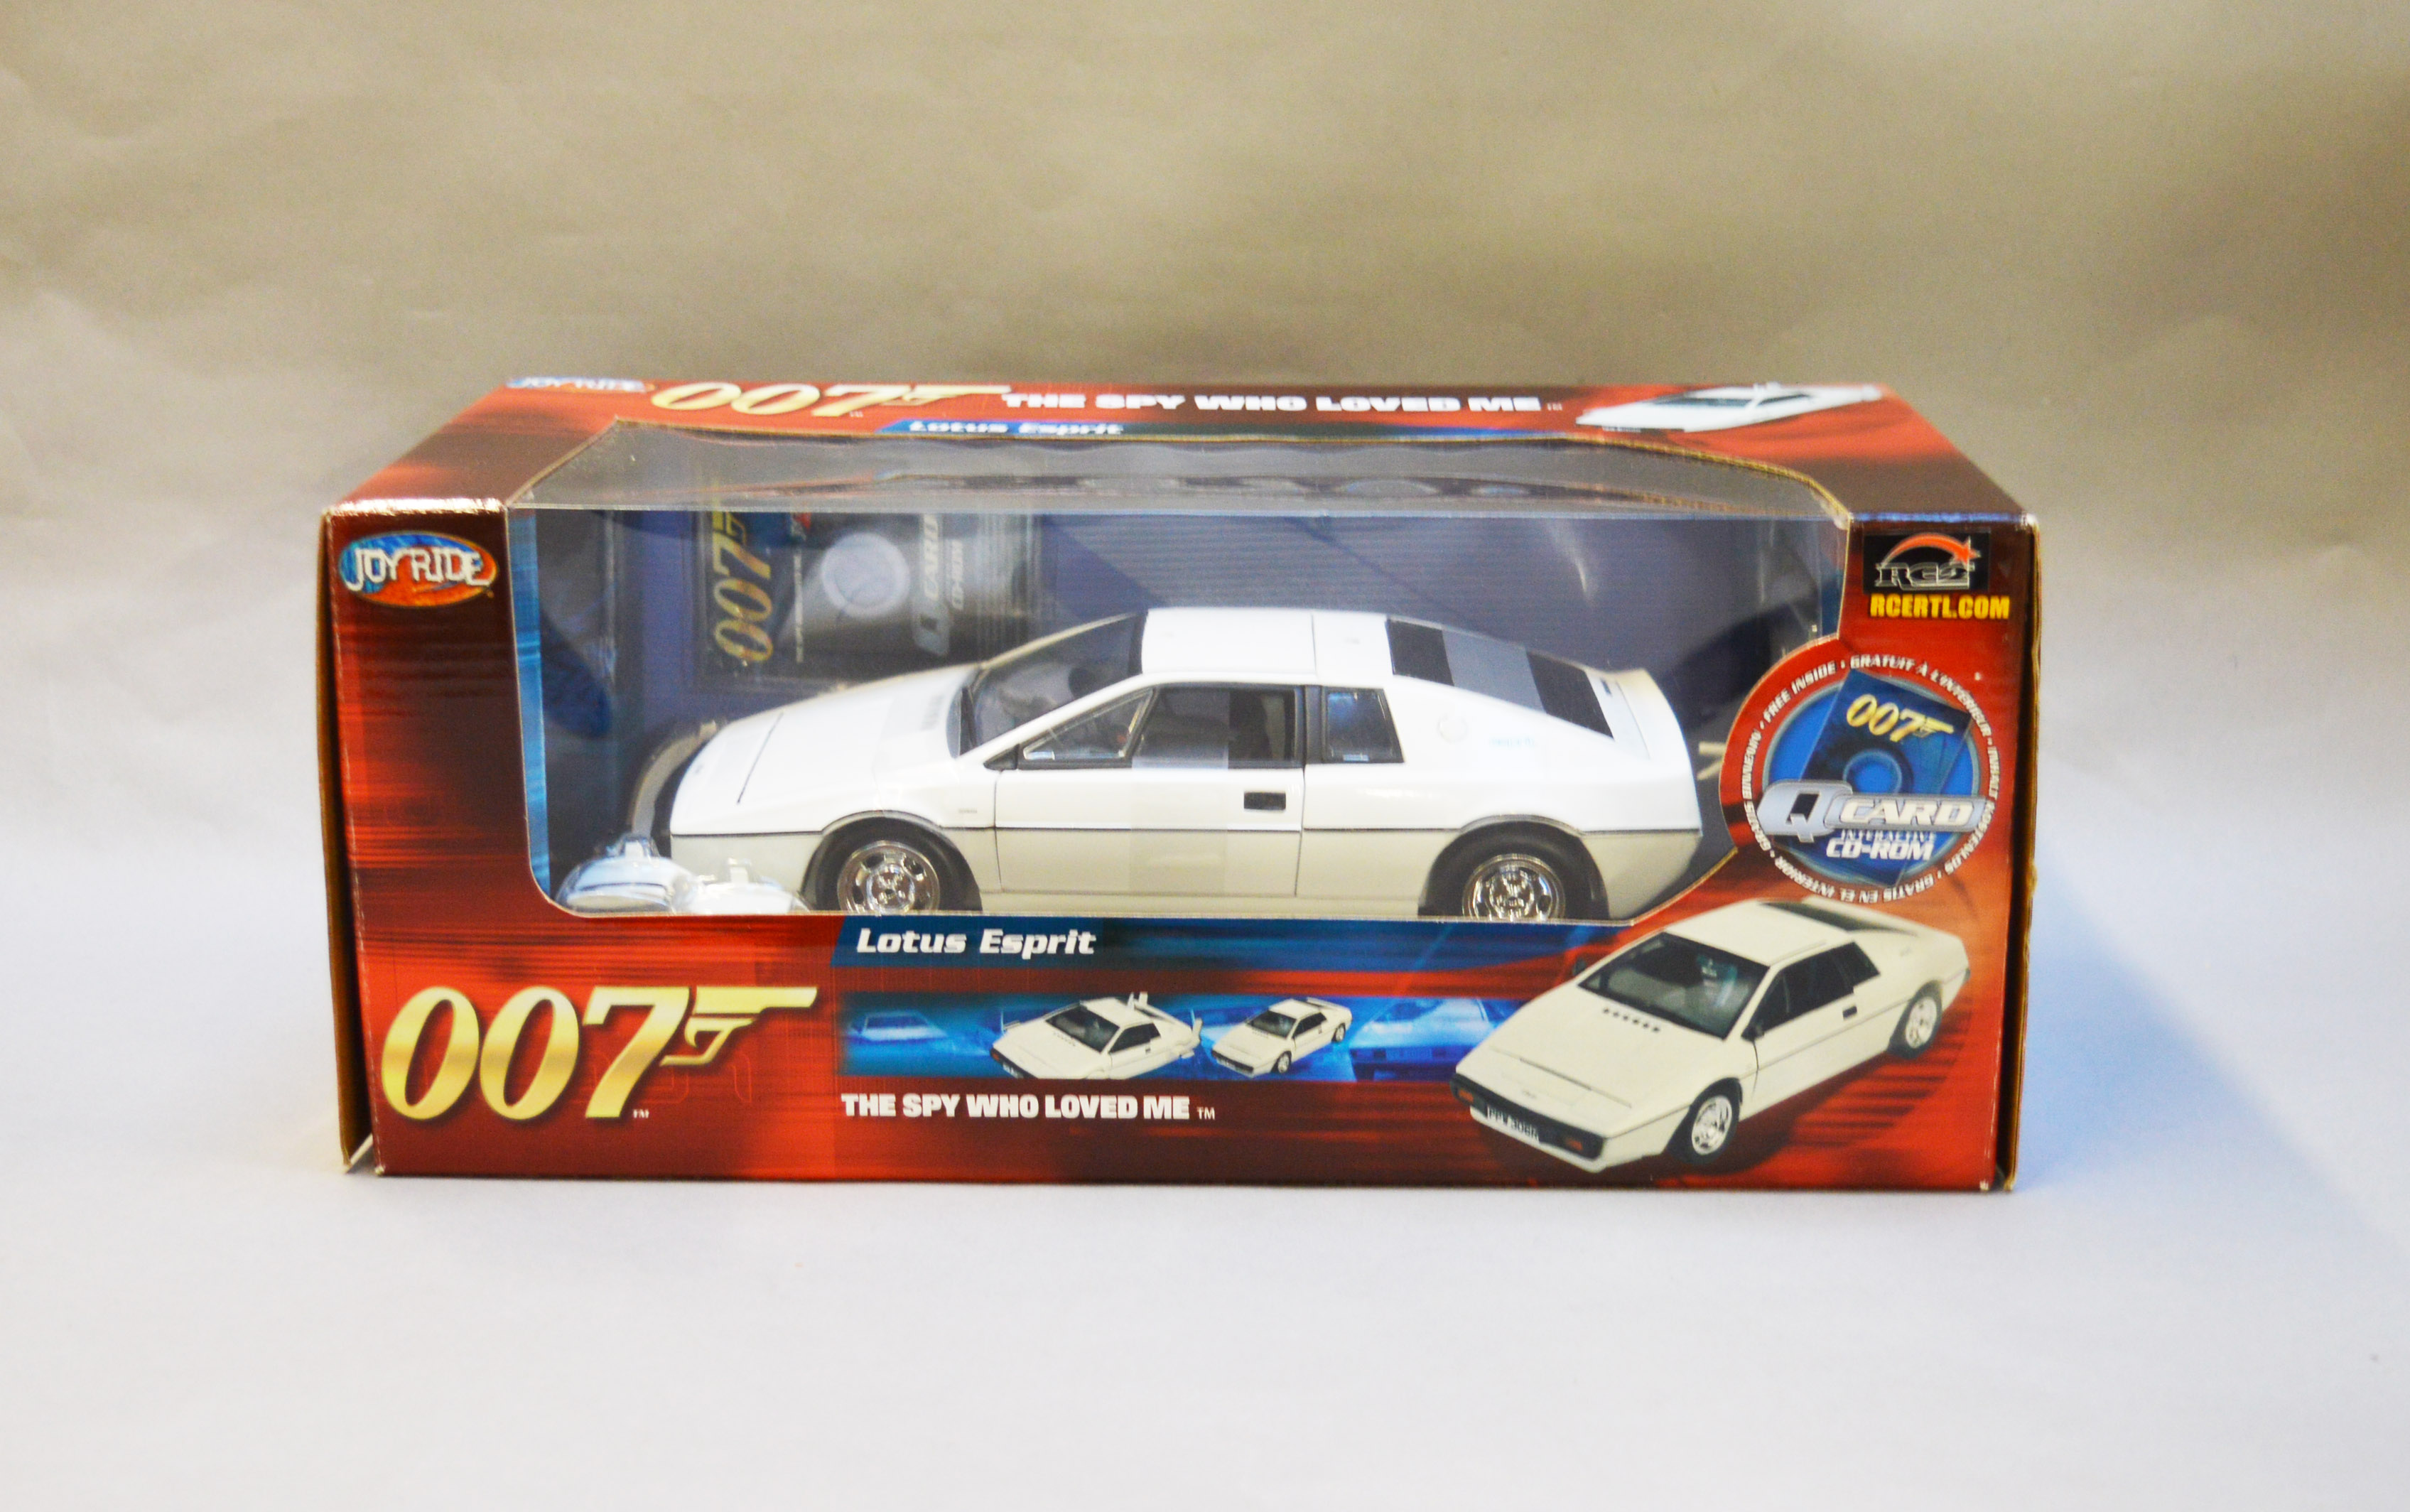 James Bond 007. A boxed Joyride 1:18 scale Lotus Esprit in white, issued in 2006, modelled on the